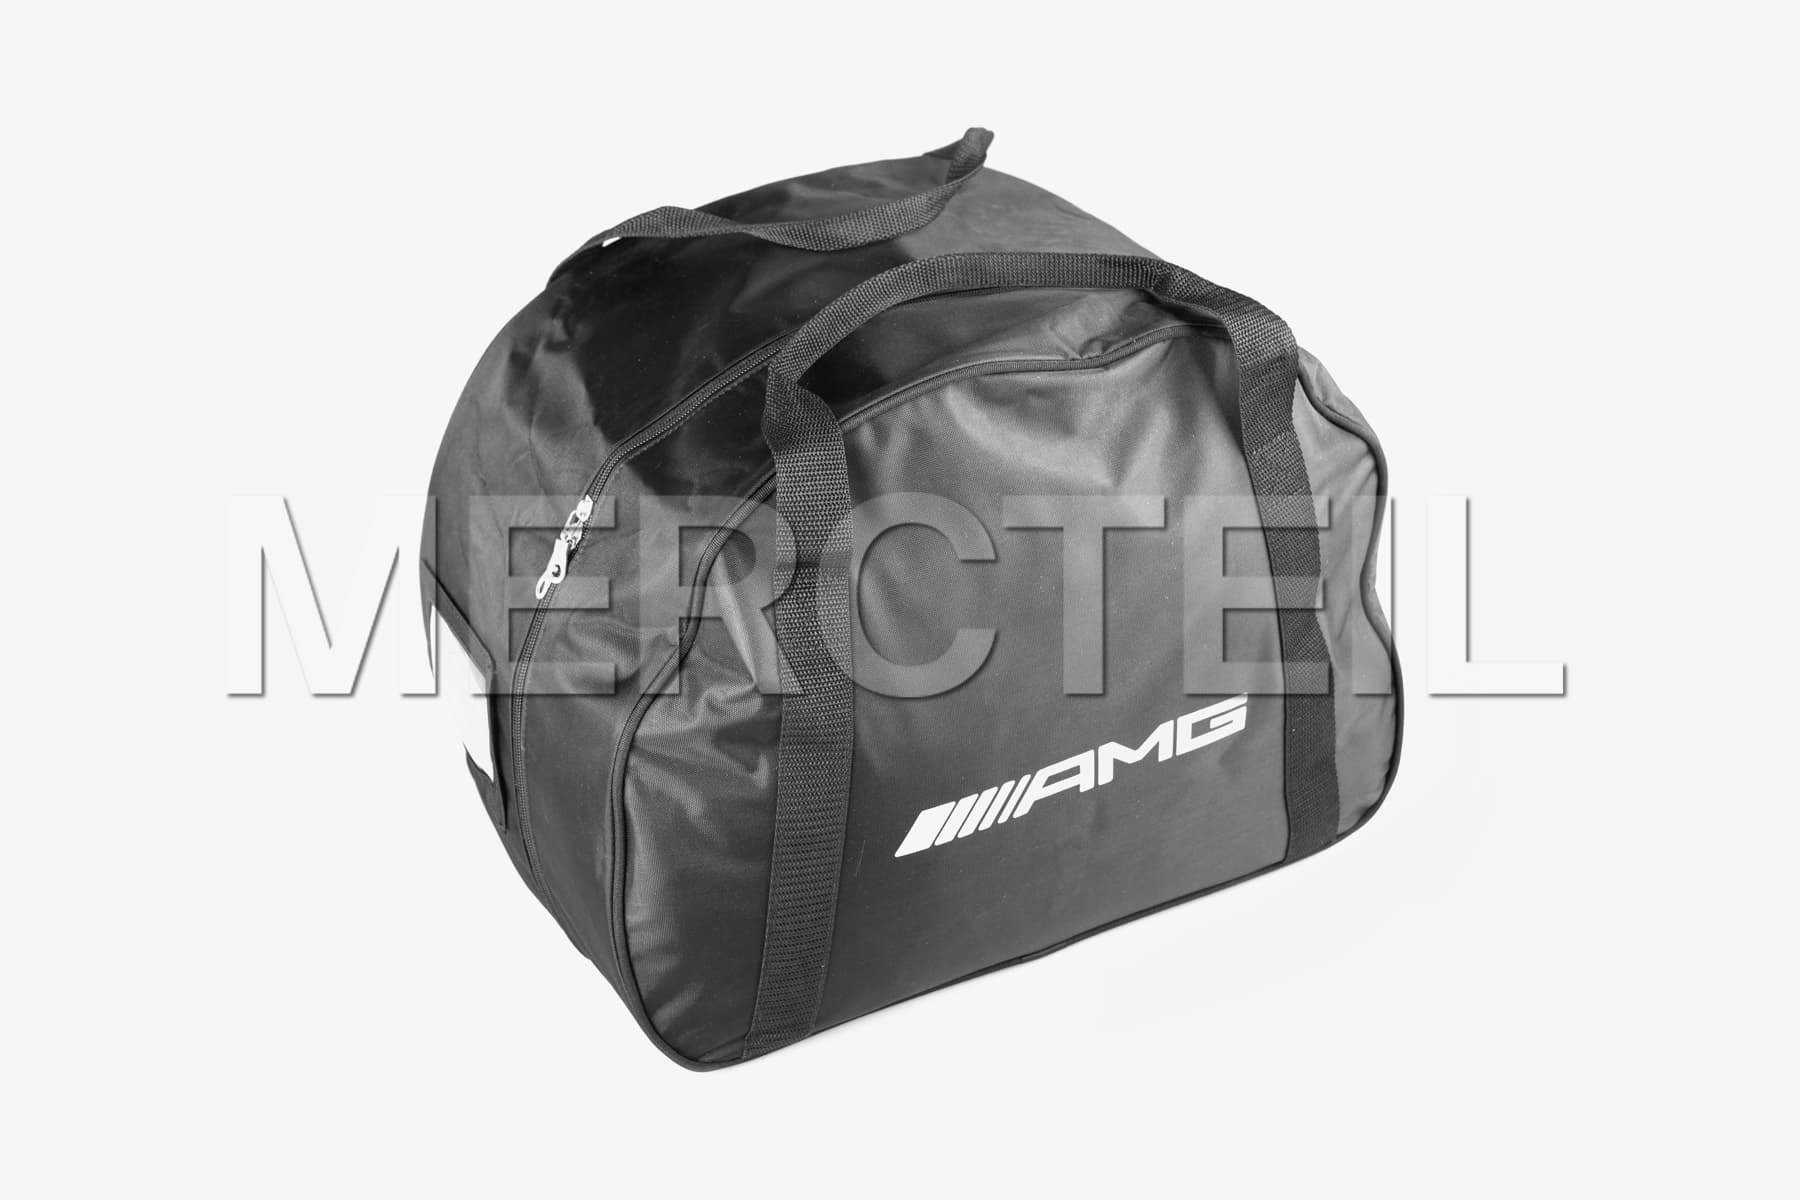 C Class Cabriolet AMG Indoor Car Cover A205 Genuine Mercedes AMG (part number: A2058990386)